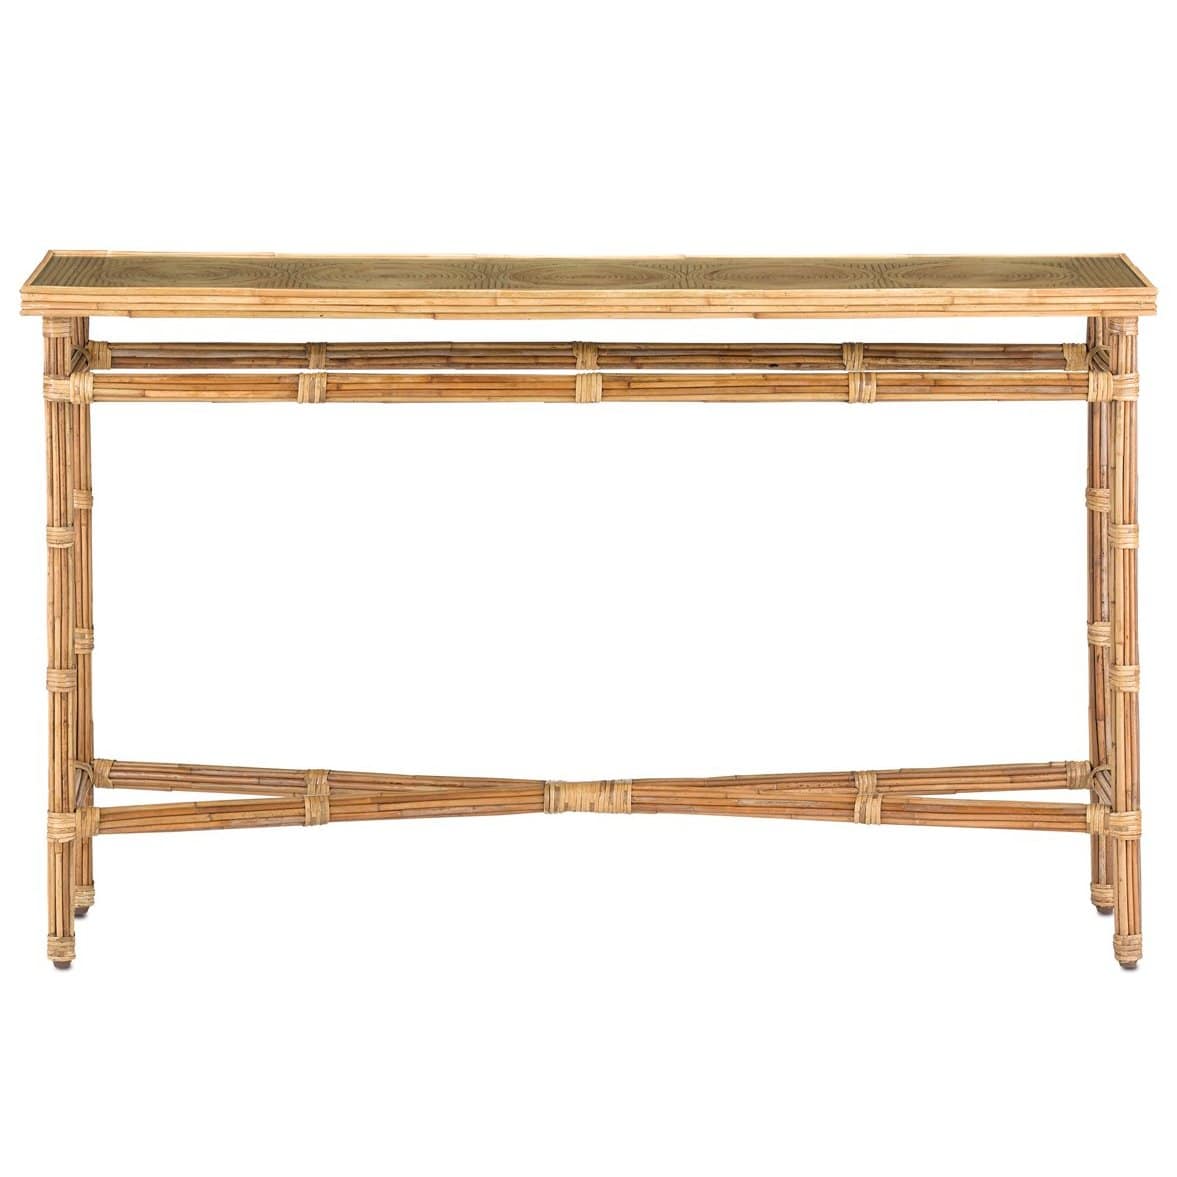 Currey & Company Silang Console Table Furniture currey-co-3000-0174